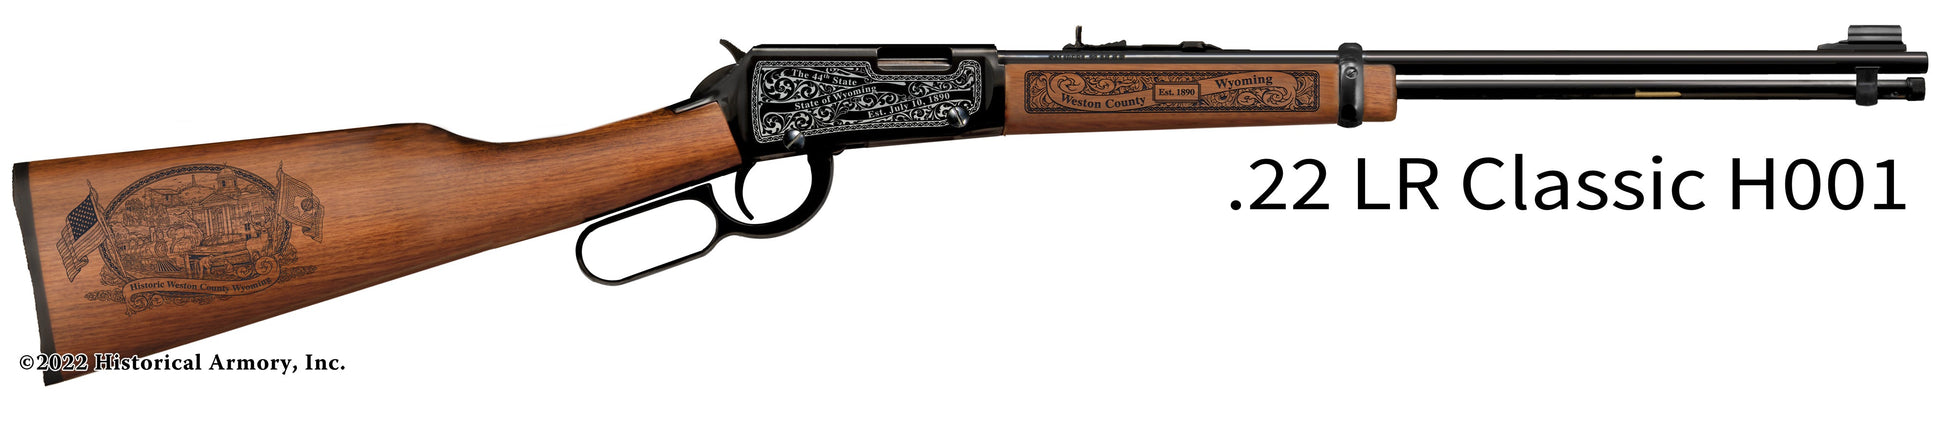 Weston County Wyoming Engraved Henry H001 Rifle